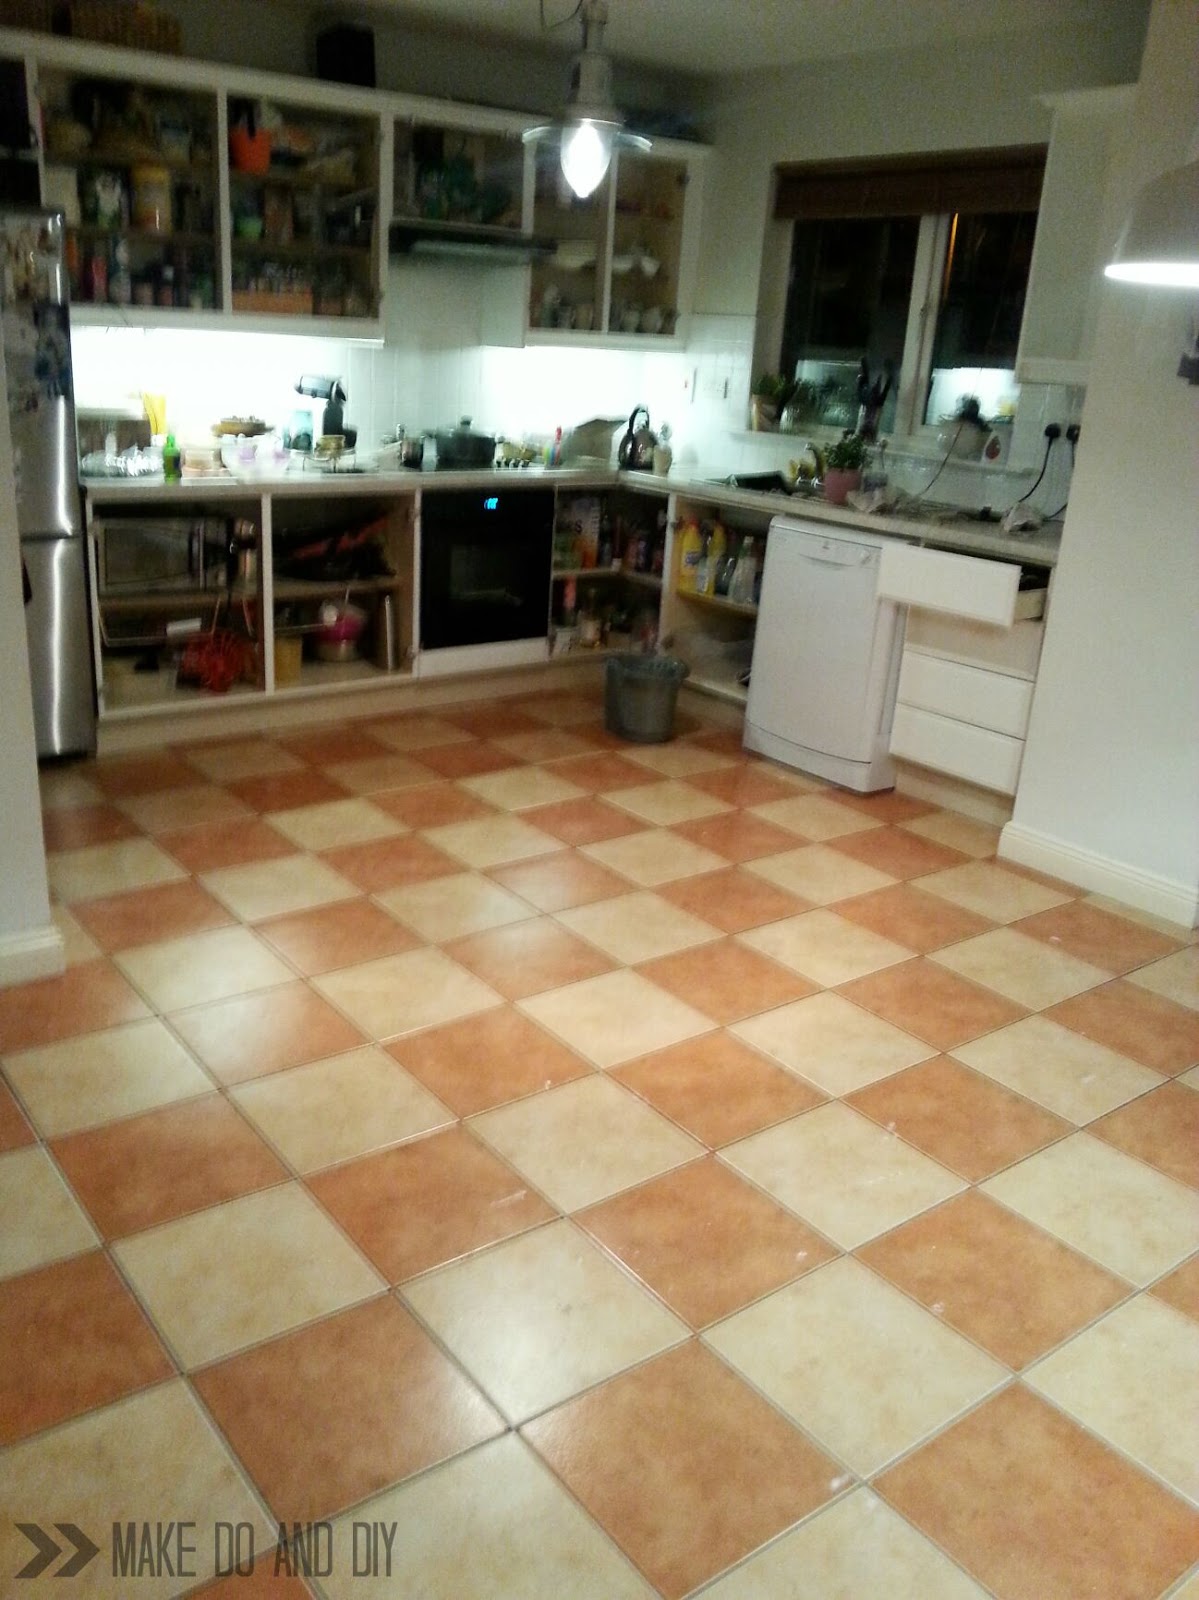 Painted Tile Floor No Really Make Do, Painting Tile Floors Kitchen